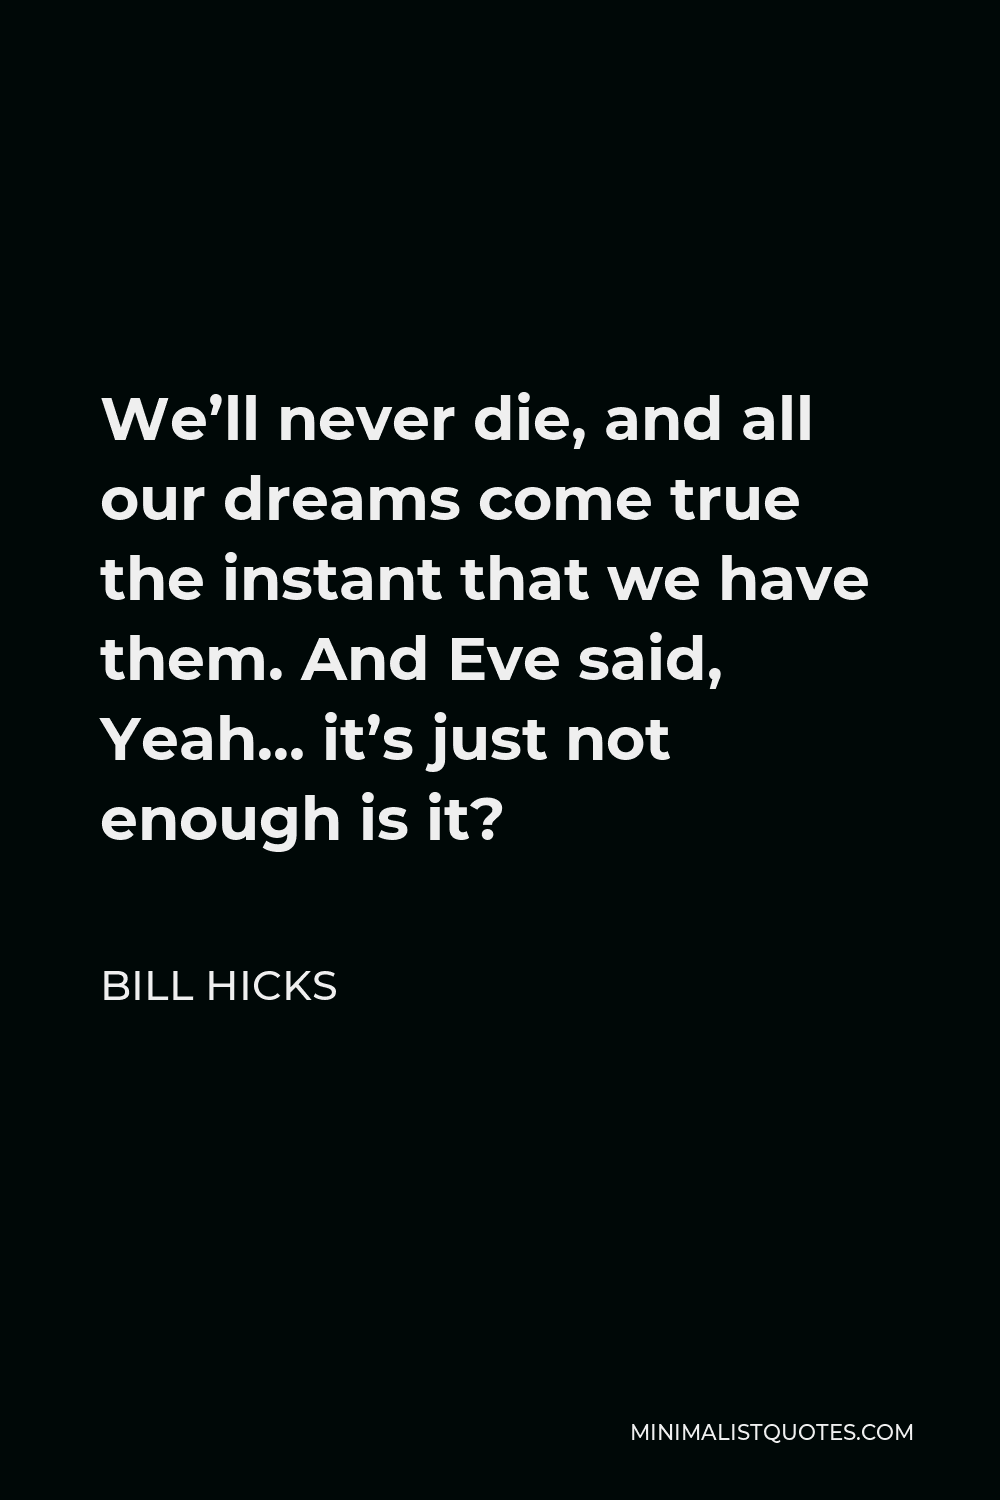 Bill Hicks Quote - We’ll never die, and all our dreams come true the instant that we have them. And Eve said, Yeah… it’s just not enough is it?